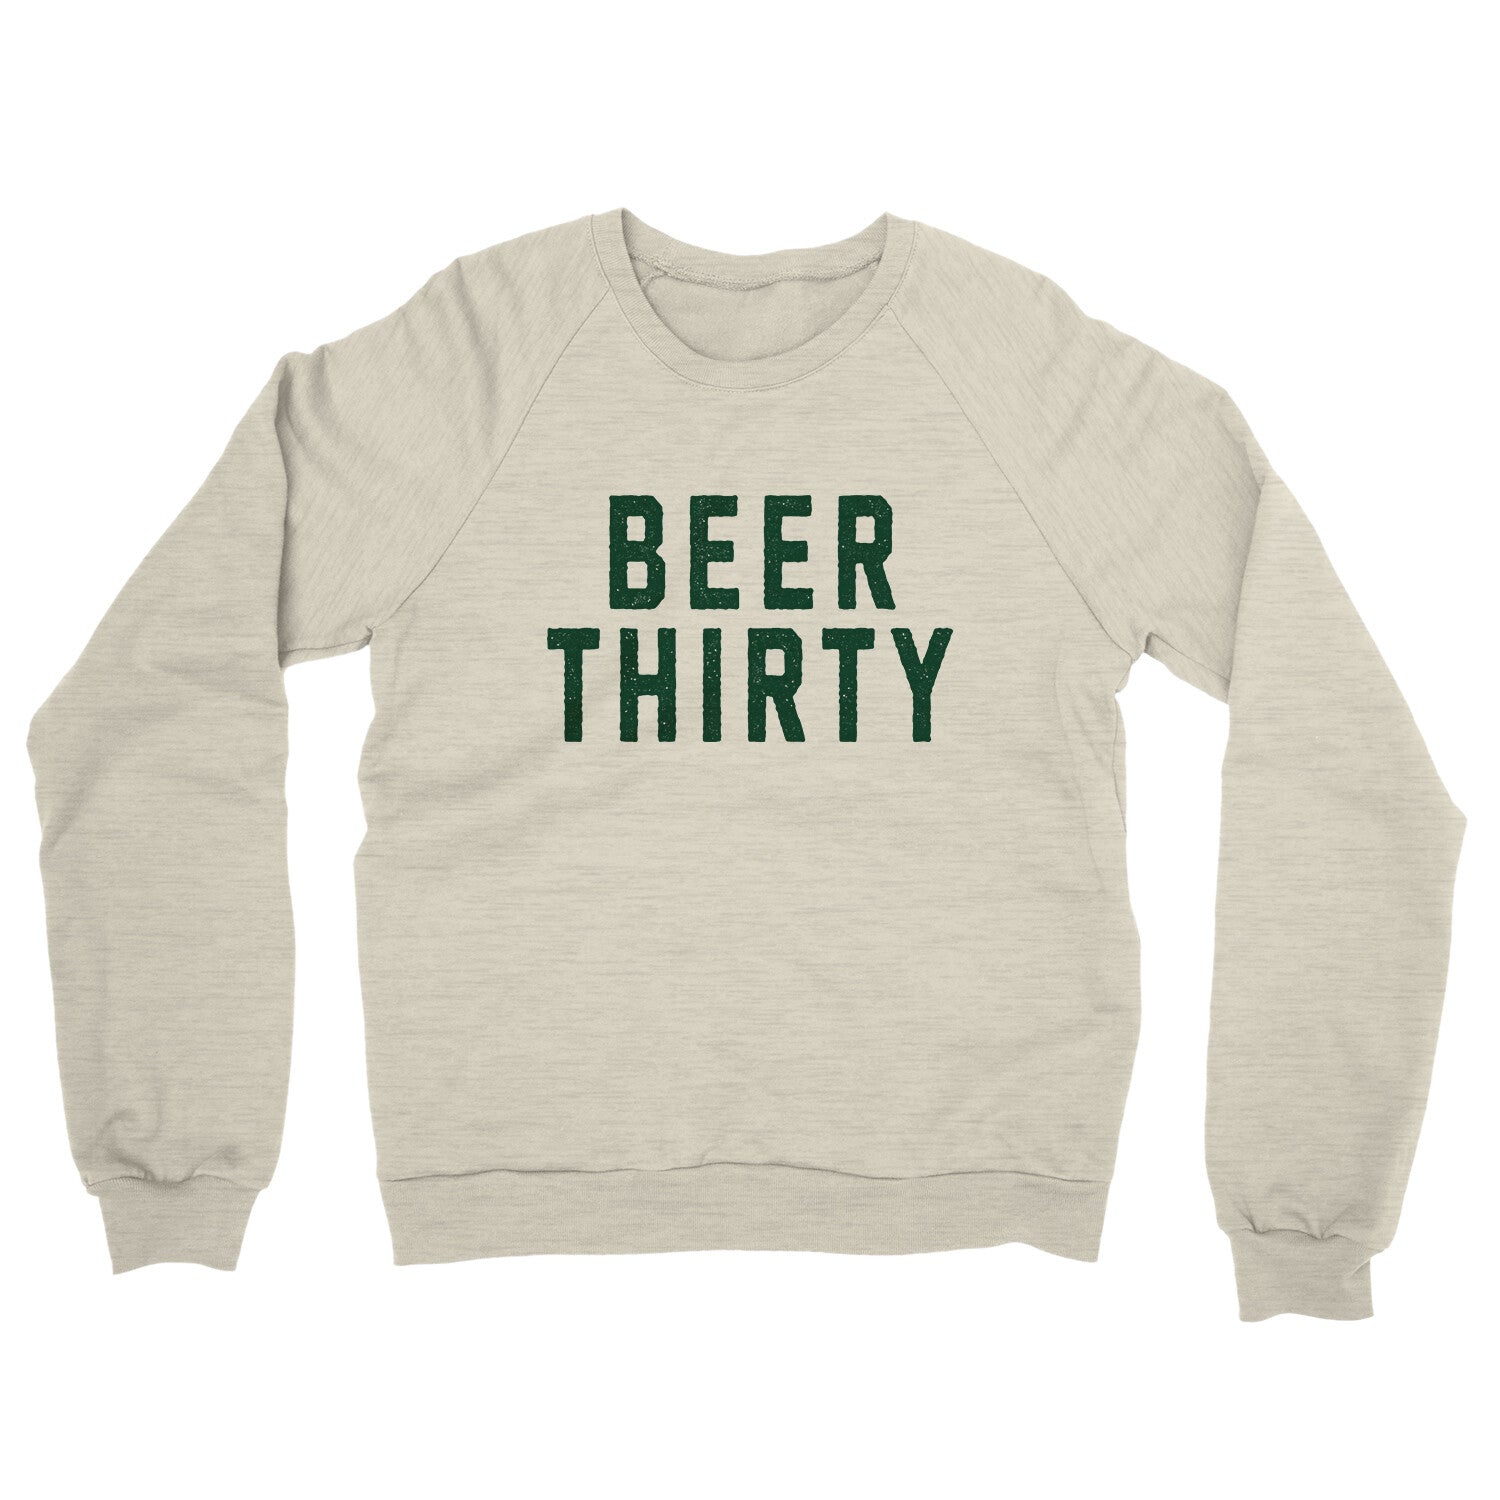 Beer Thirty in Heather Oatmeal Color